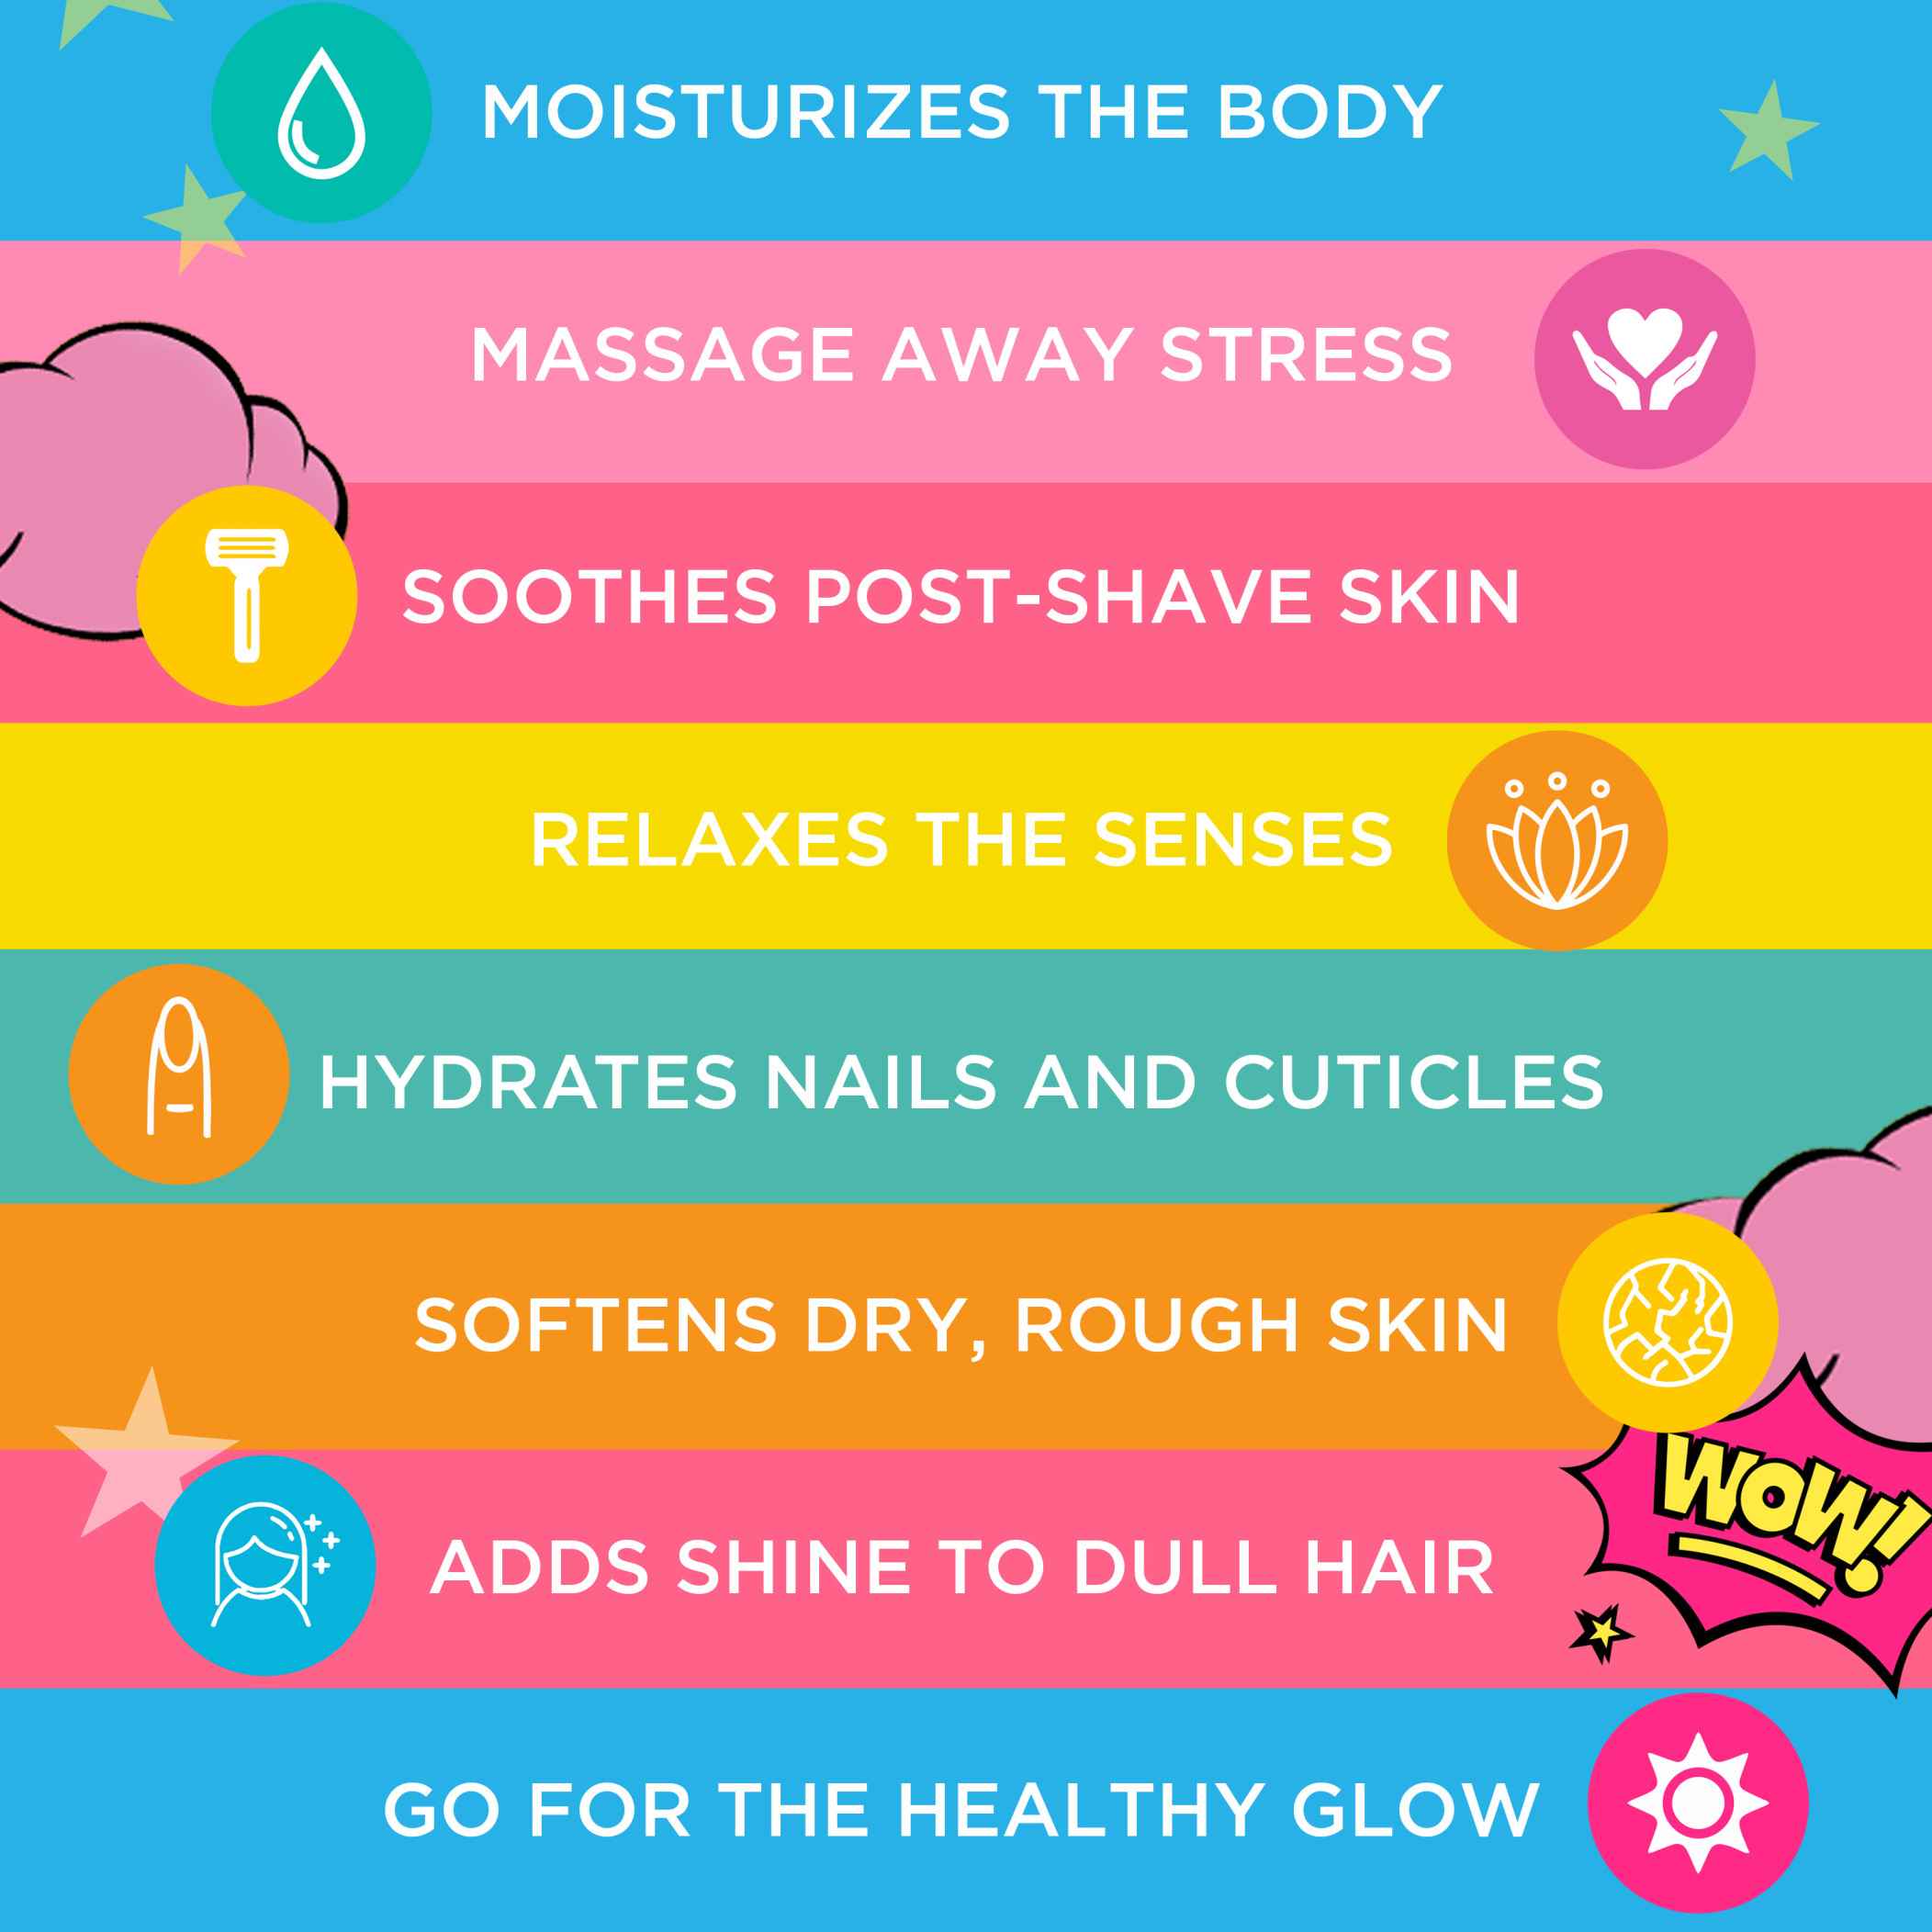 8 ways to use- moisturizes the body, massage away stress, soothes post-shave skin, relaxes the senses, hydrates nails and cuticles, softens dry, rough skin, adds shine to dull hair and go for the healthy glow